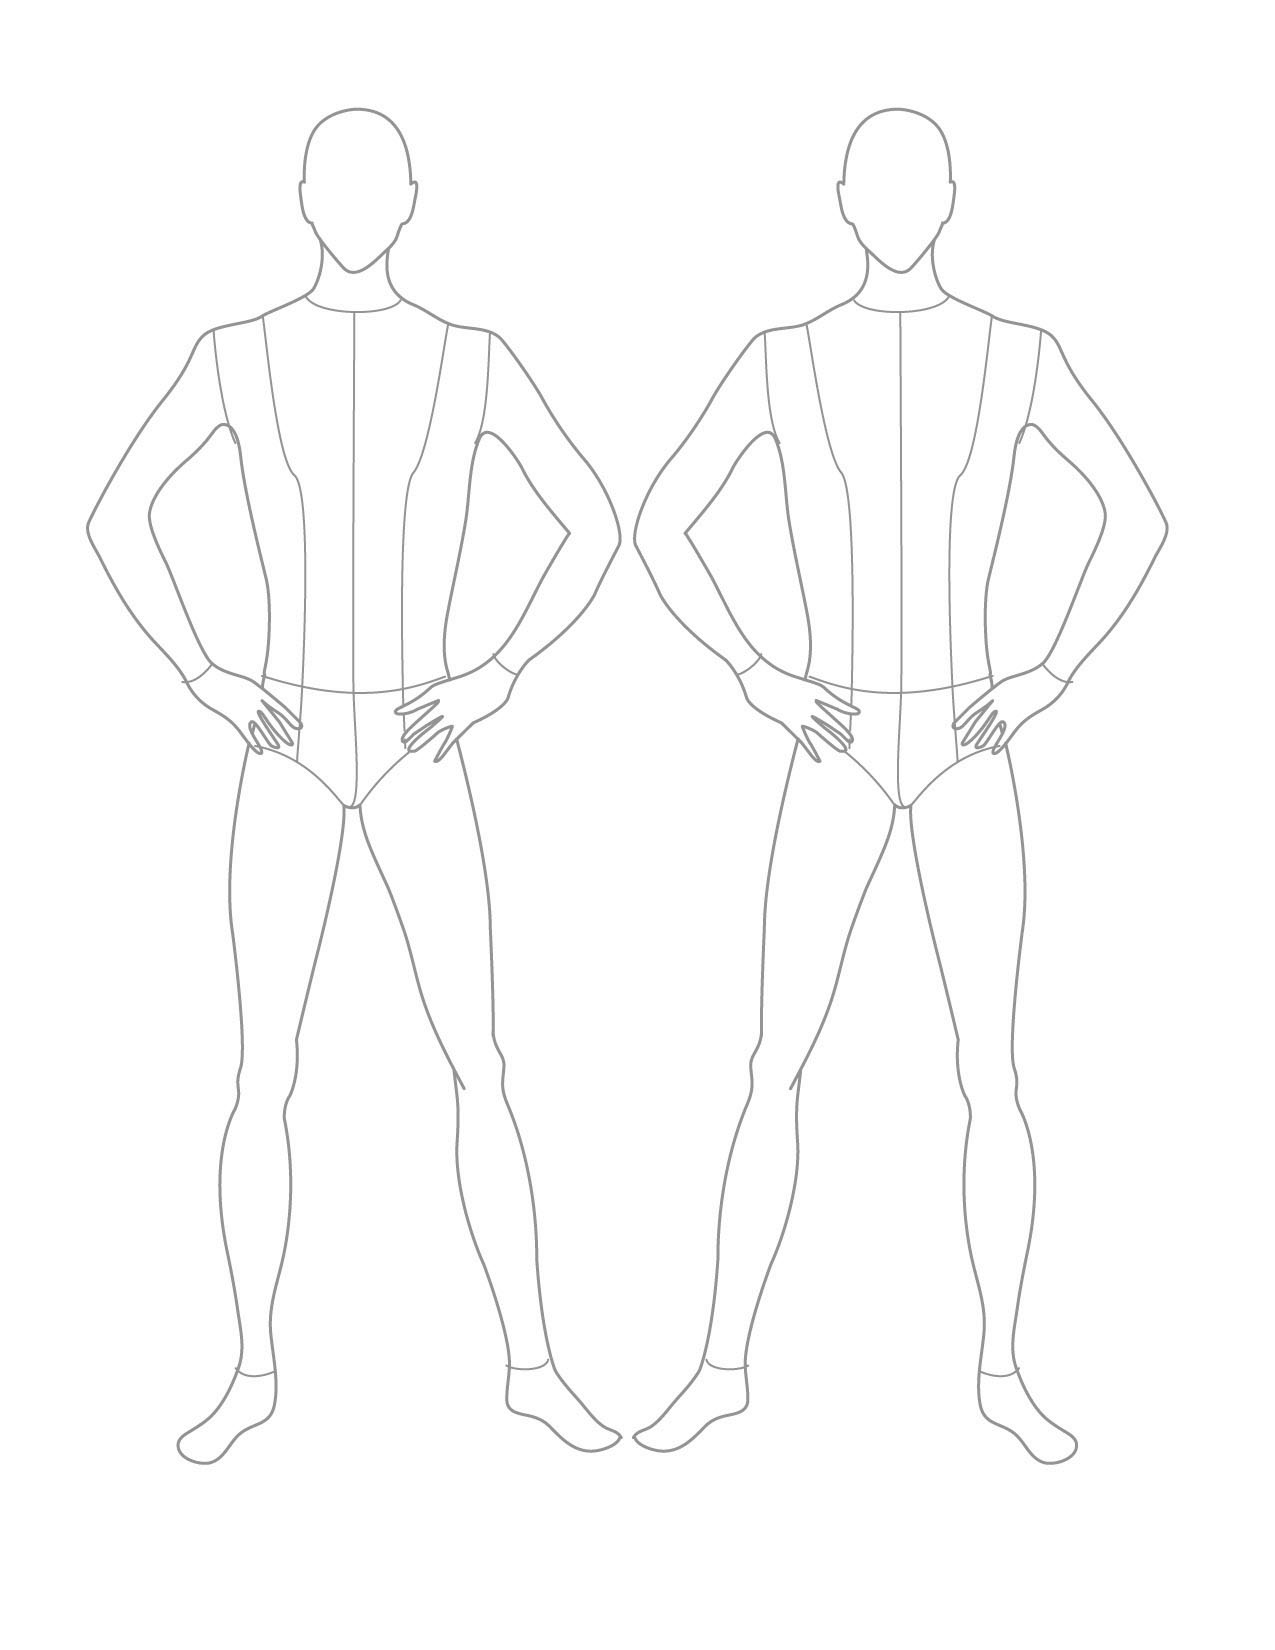 Male Figure Drawing Templates at GetDrawings.com | Free for personal ...